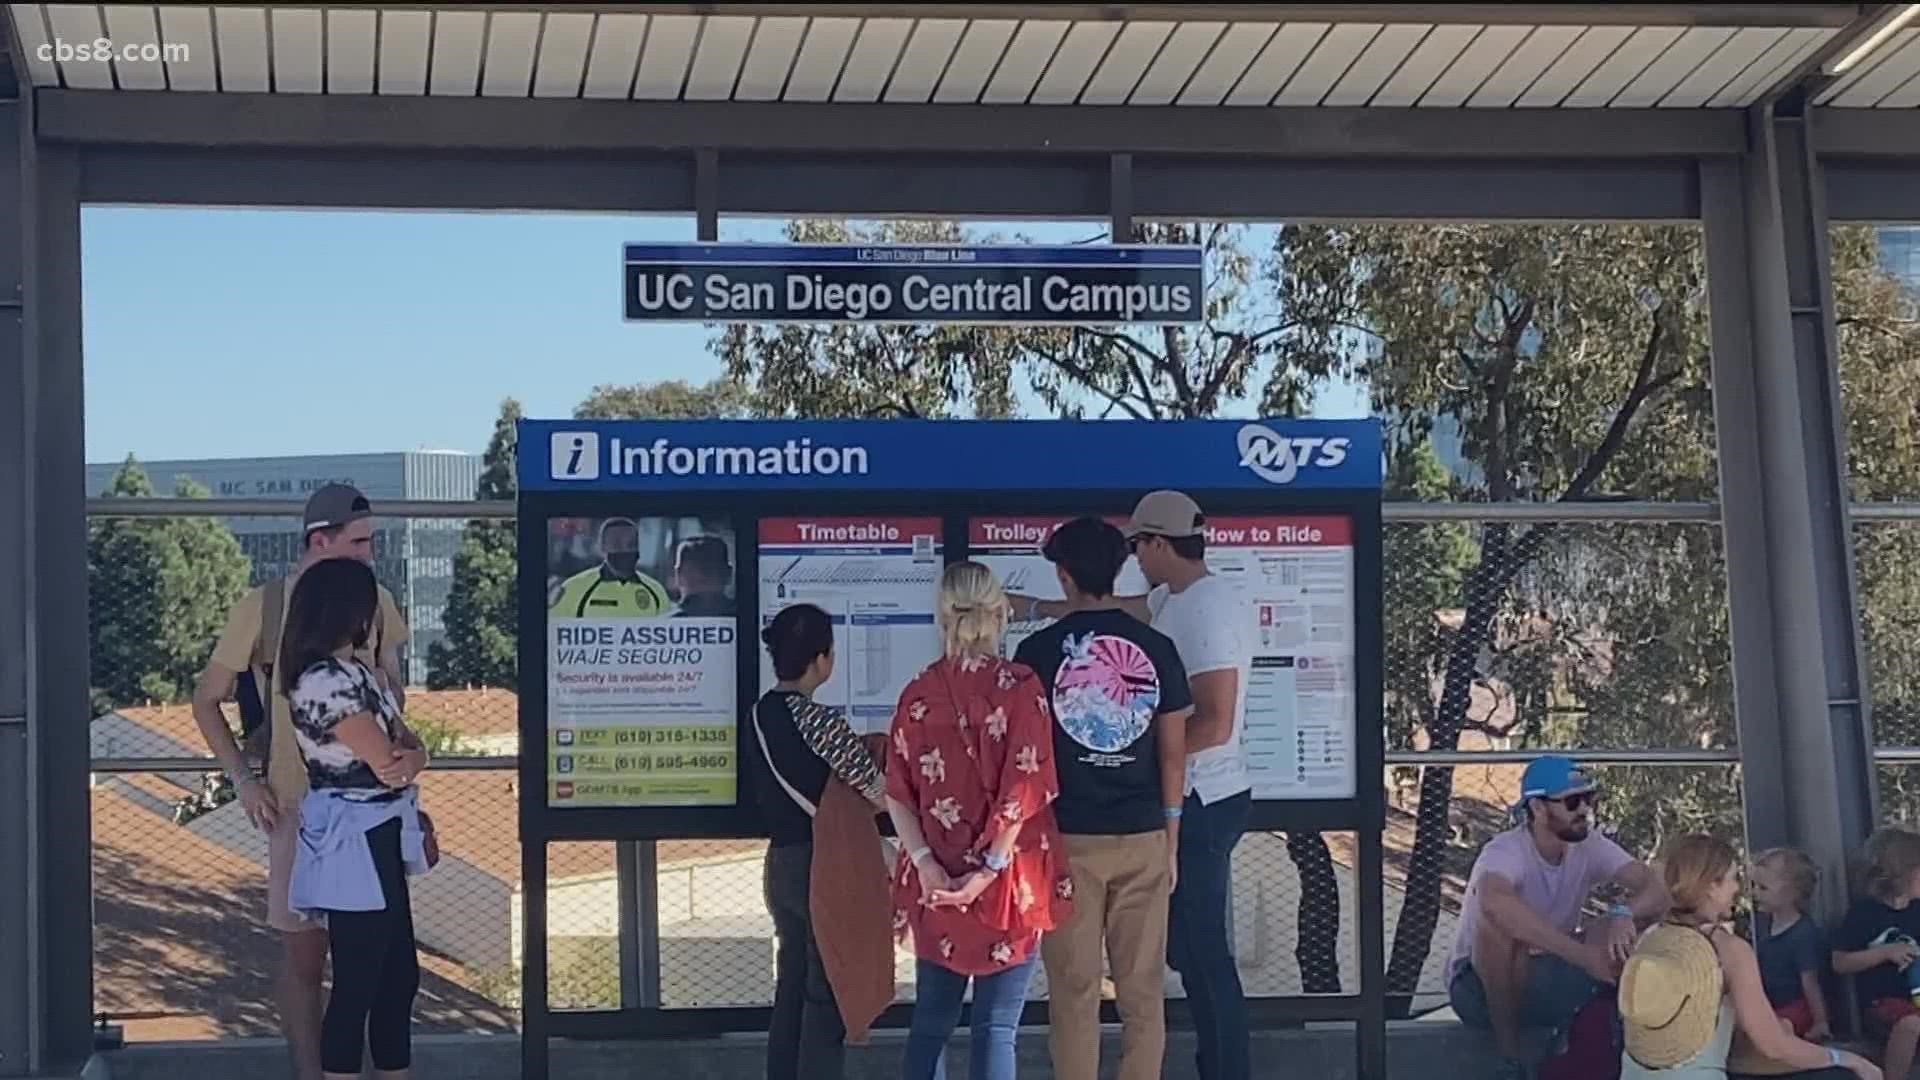 Crowds of people hopped on the trolley at the UCSD stop for a free ride.